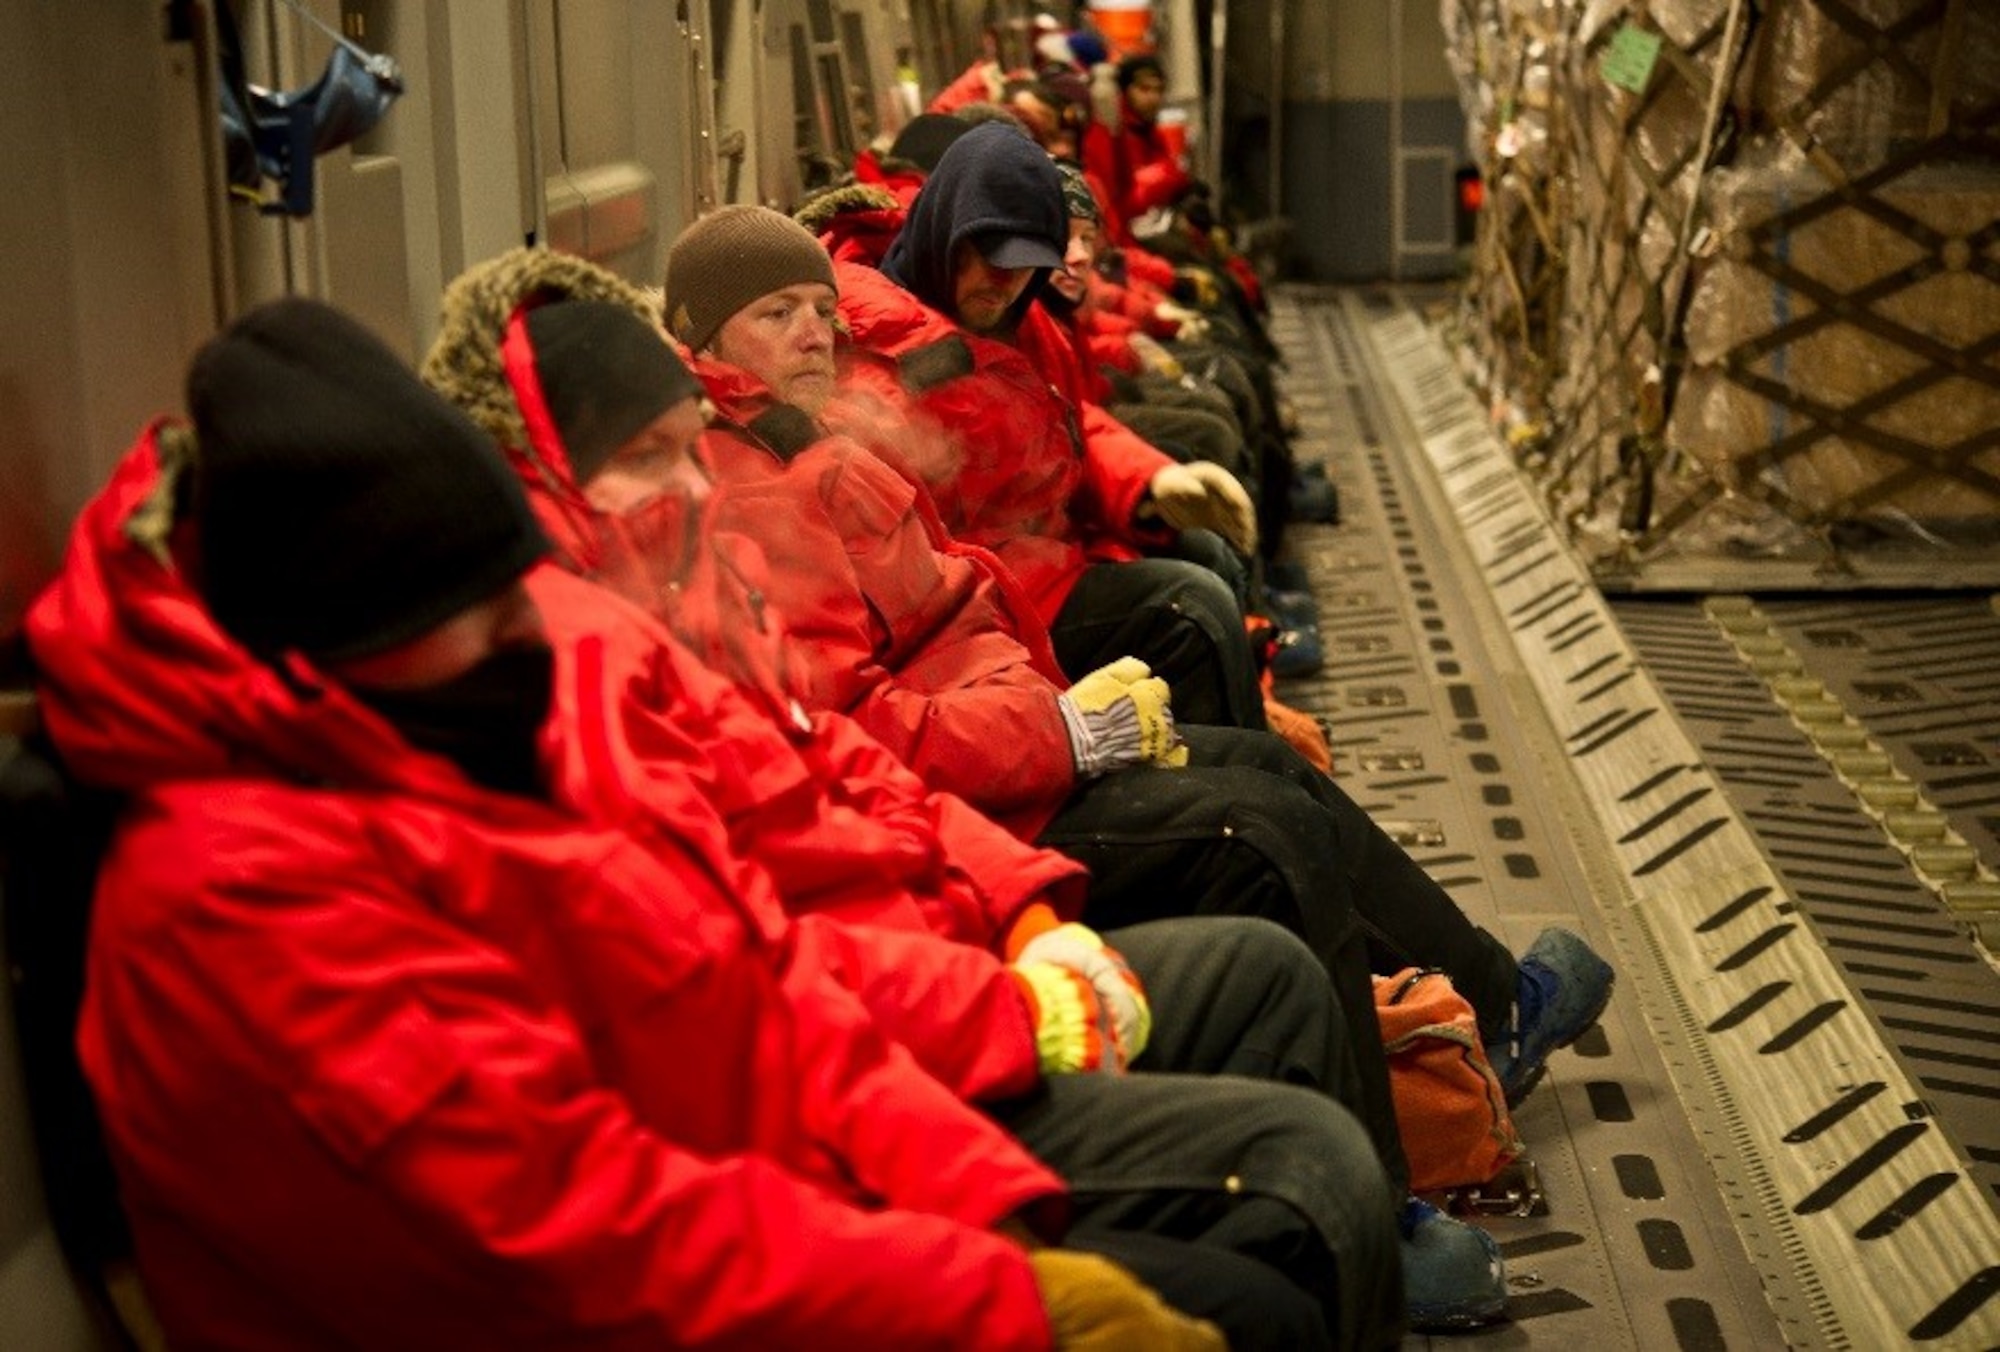 Passengers leaving Antarctica wait for cargo to finish being offloaded and onloaded onto a U.S. Air Force C-17 Globemaster III before takeoff during Operation Deep Freeze (ODF), July 15, 2016 at Pegasus Ice Runway, Antarctica. ODF is unlike any other U.S. military operation. Antarctica is the coldest, windiest, most inhospitable continent on the globe. Conditions are continuously monitored due to the unpredictable and quick-changing weather at the bottom of the world to ensure safety of aircraft, ships, cargo, passengers and crews while deployed in support of ODF. (U.S. Air Force Reserve photo by Staff Sgt. Madelyn McCullough)